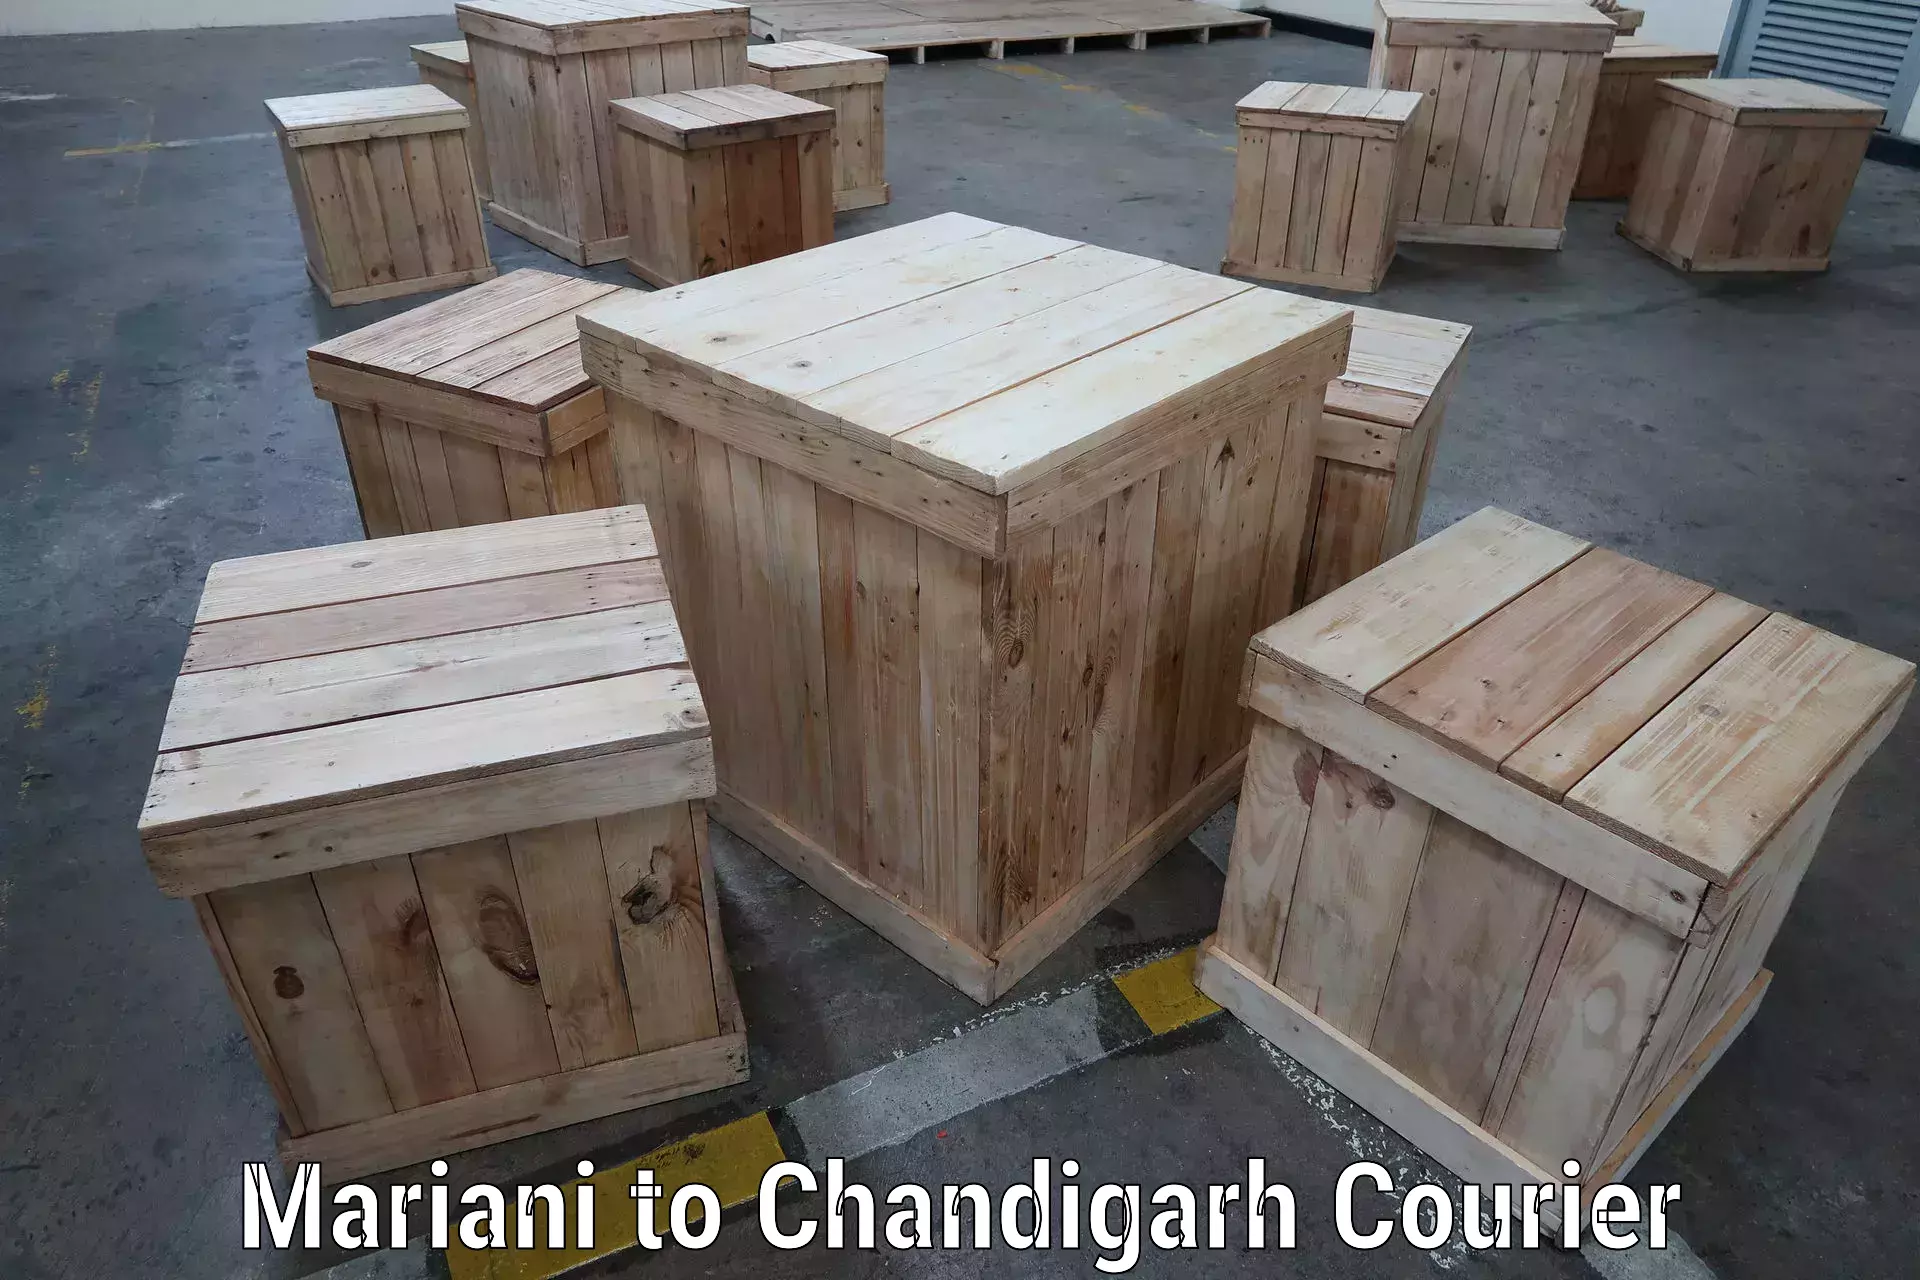 Next-day delivery options Mariani to Chandigarh